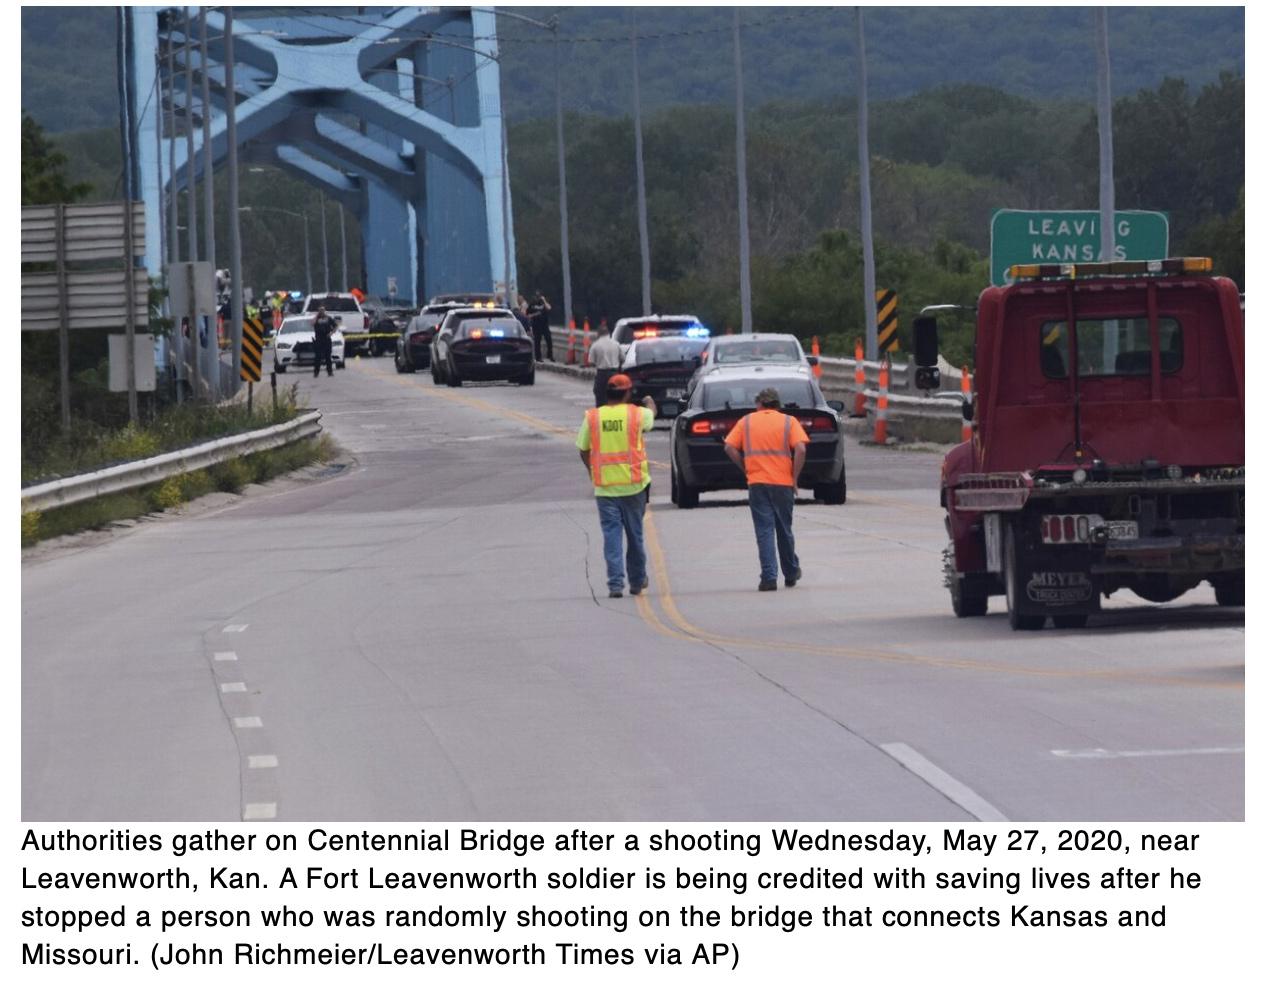  Police: Fort Leavenworth soldier saved lives by stopping shooter on bridge